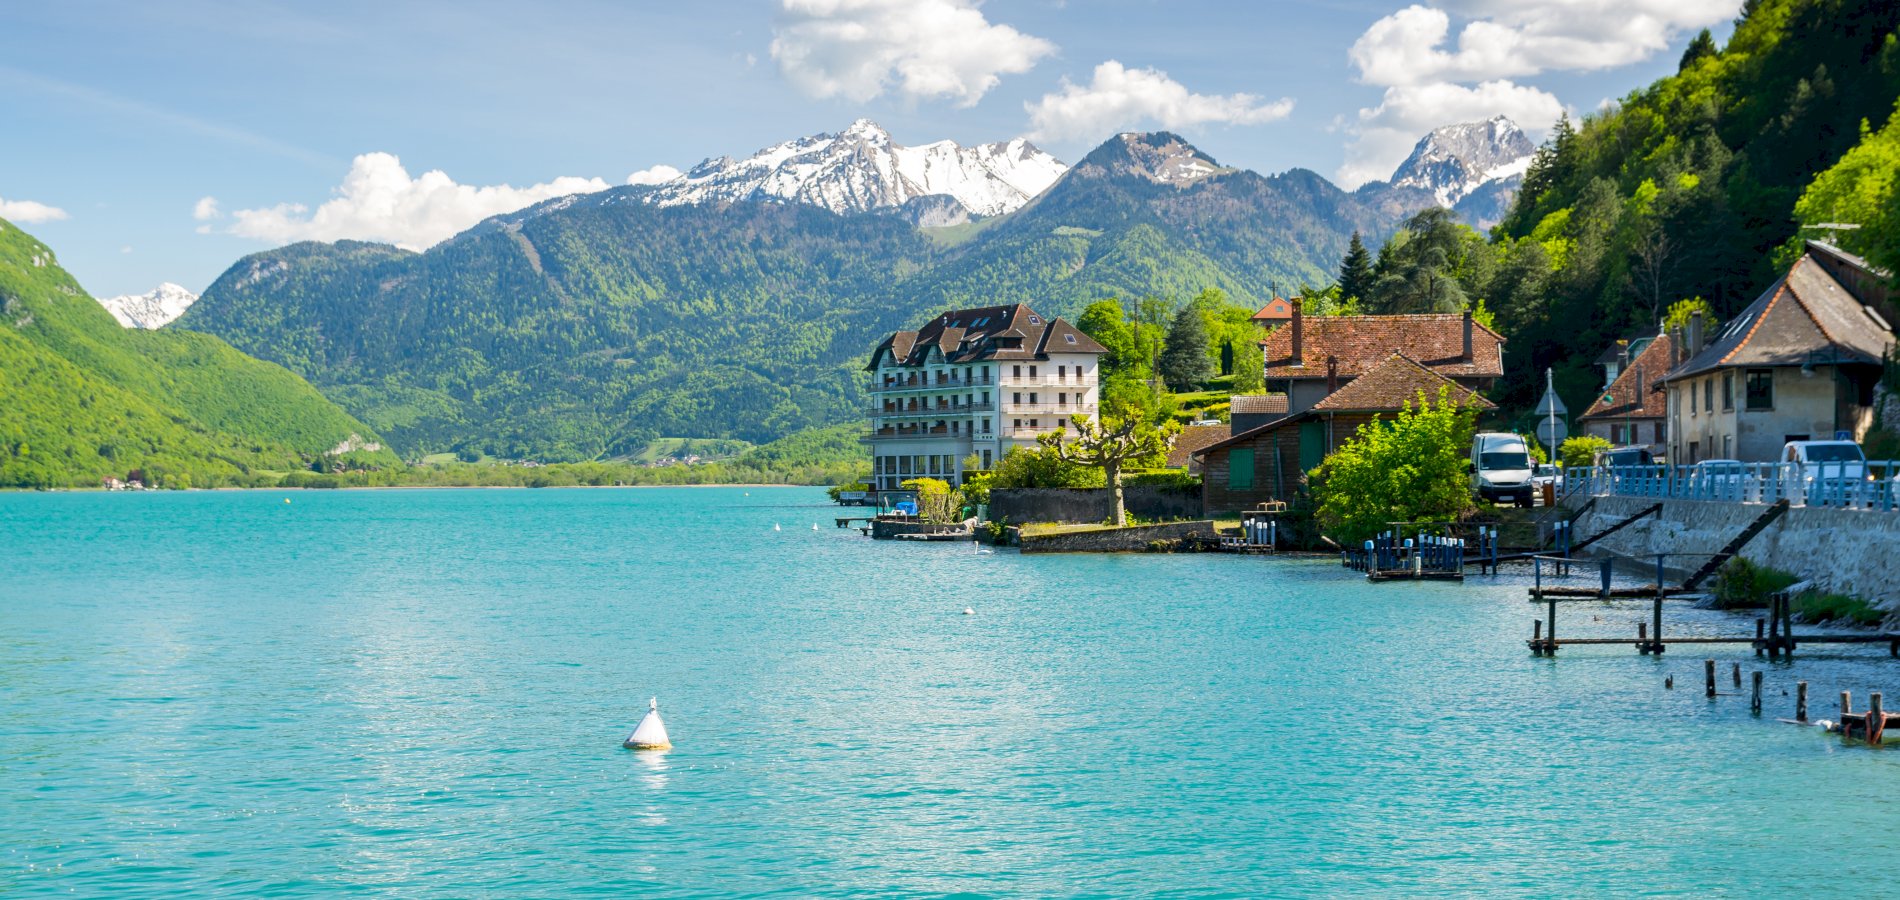 Ophorus Tours - Annecy Lake Boat Tour including Cocktail & Food